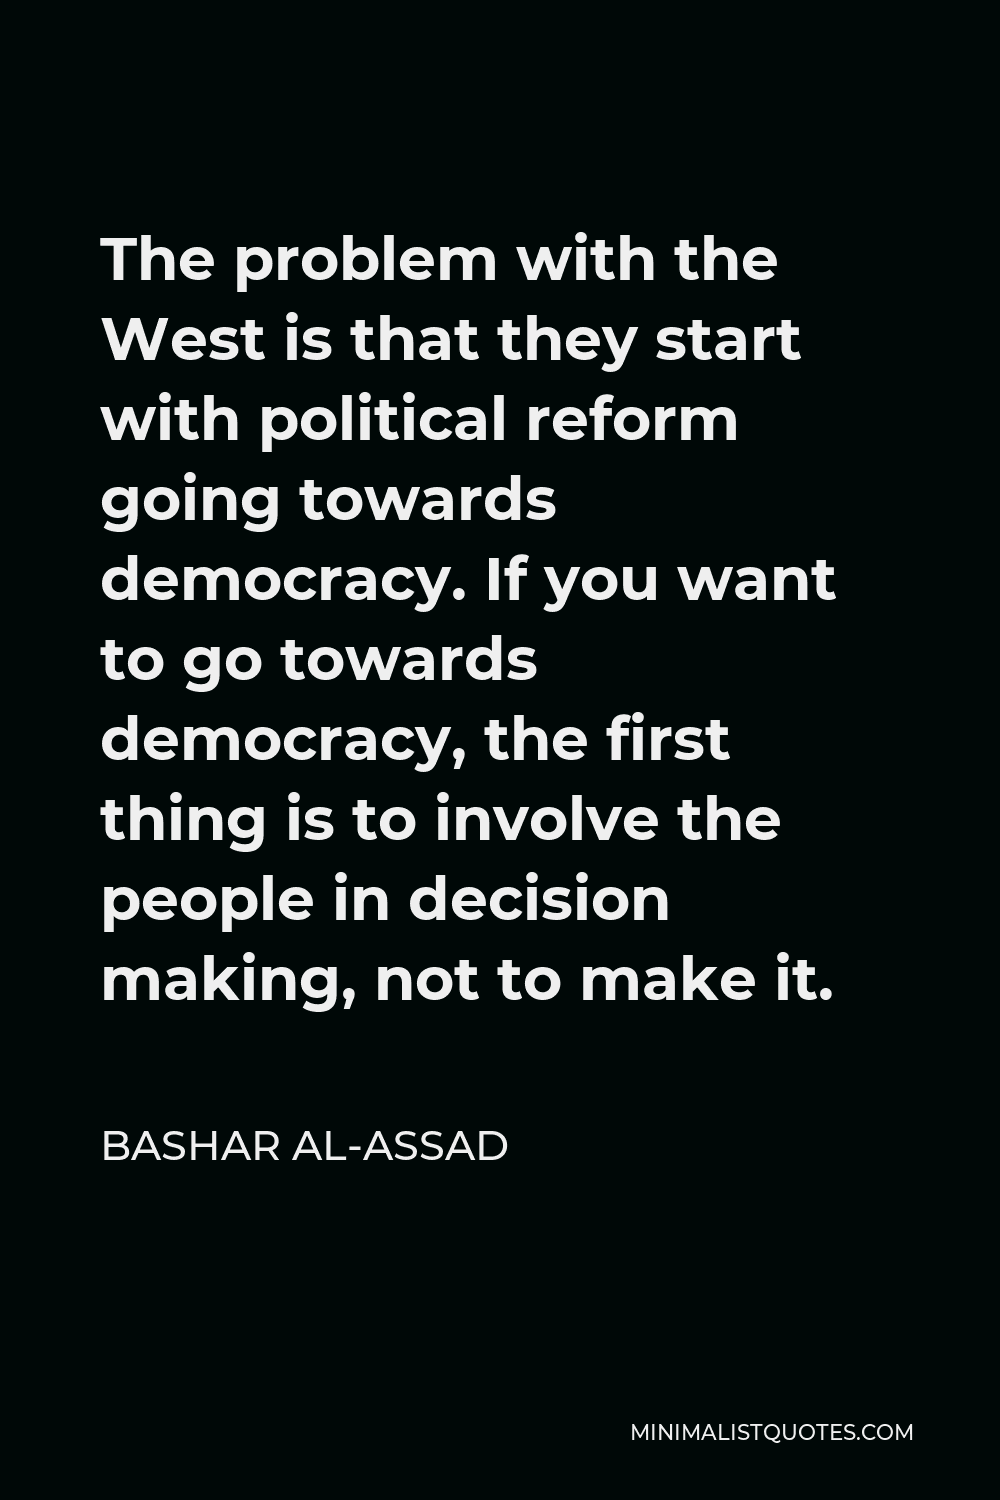 Bashar al-Assad Quote - The problem with the West is that they start with political reform going towards democracy. If you want to go towards democracy, the first thing is to involve the people in decision making, not to make it.